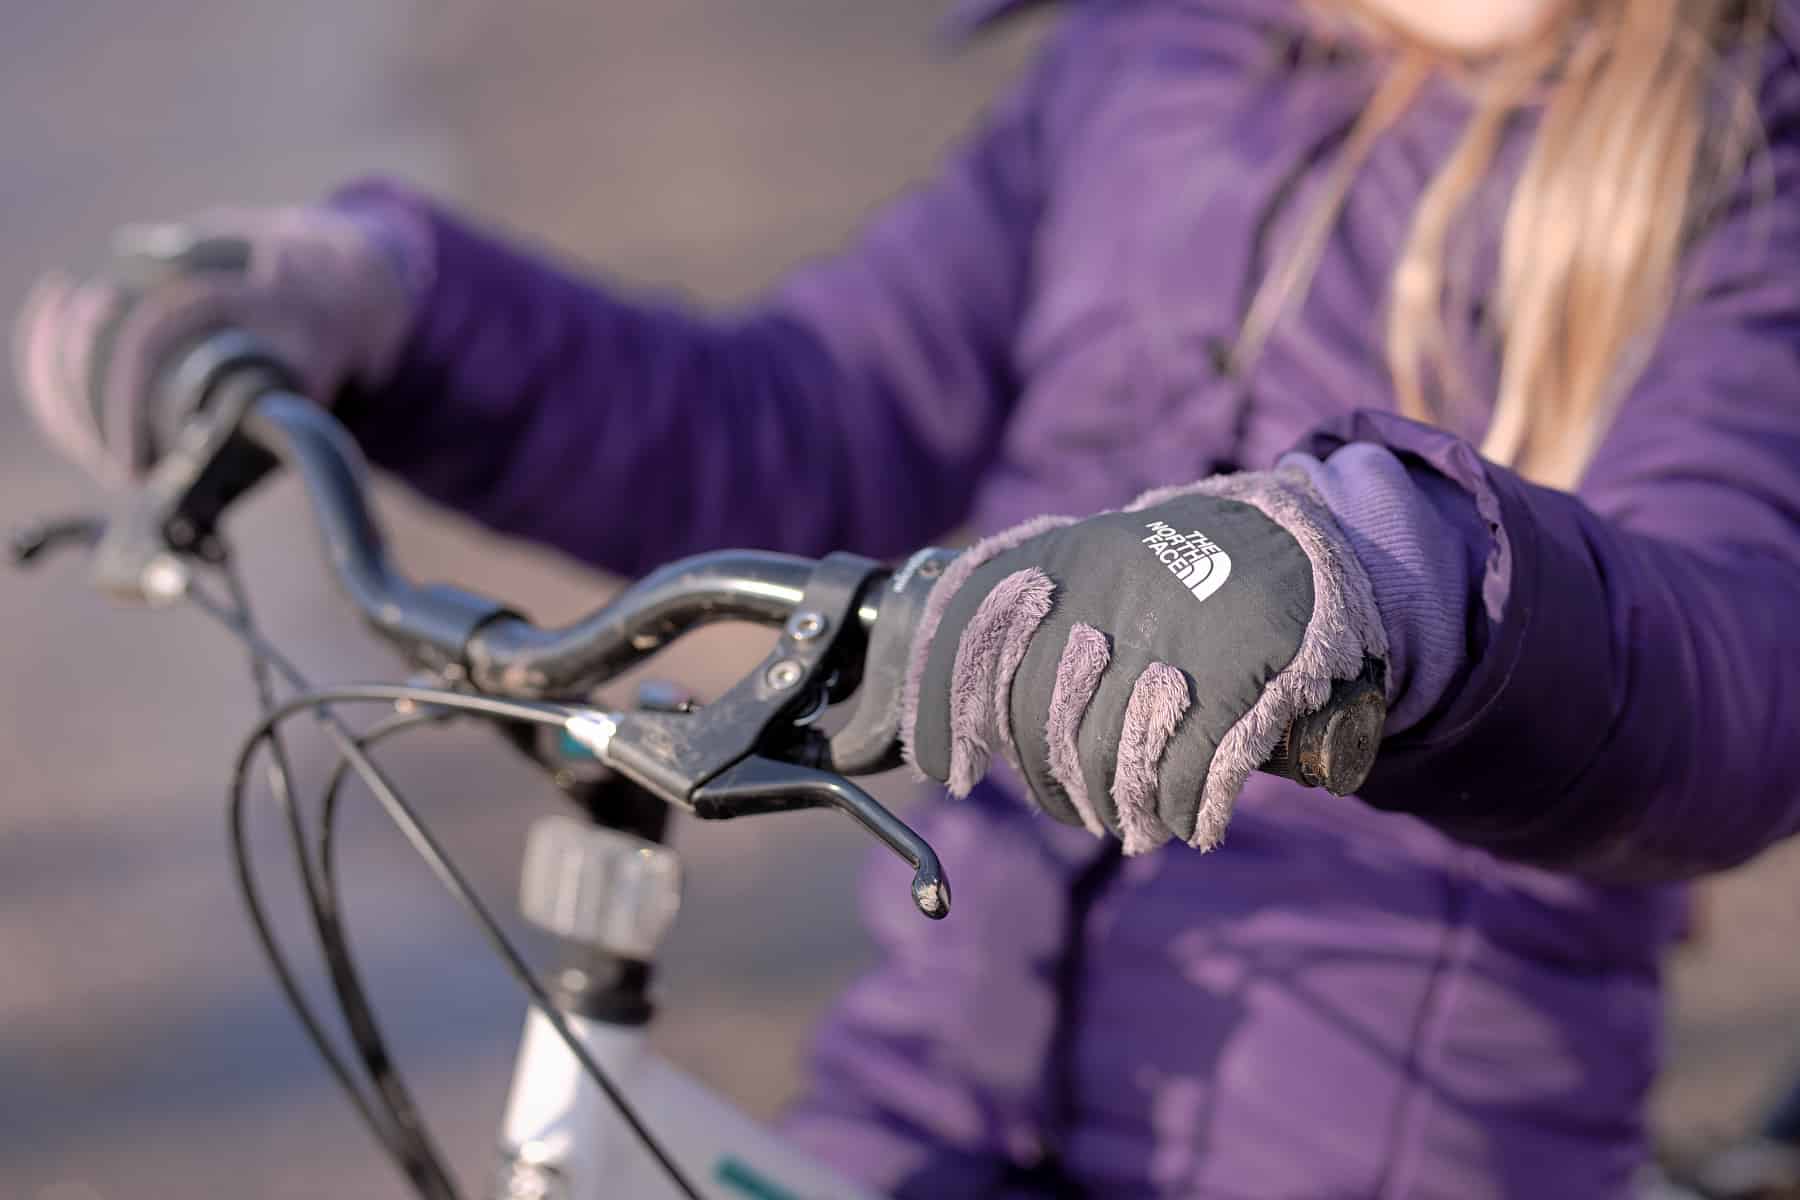 North Face Gloves - gear review - gloves for kids